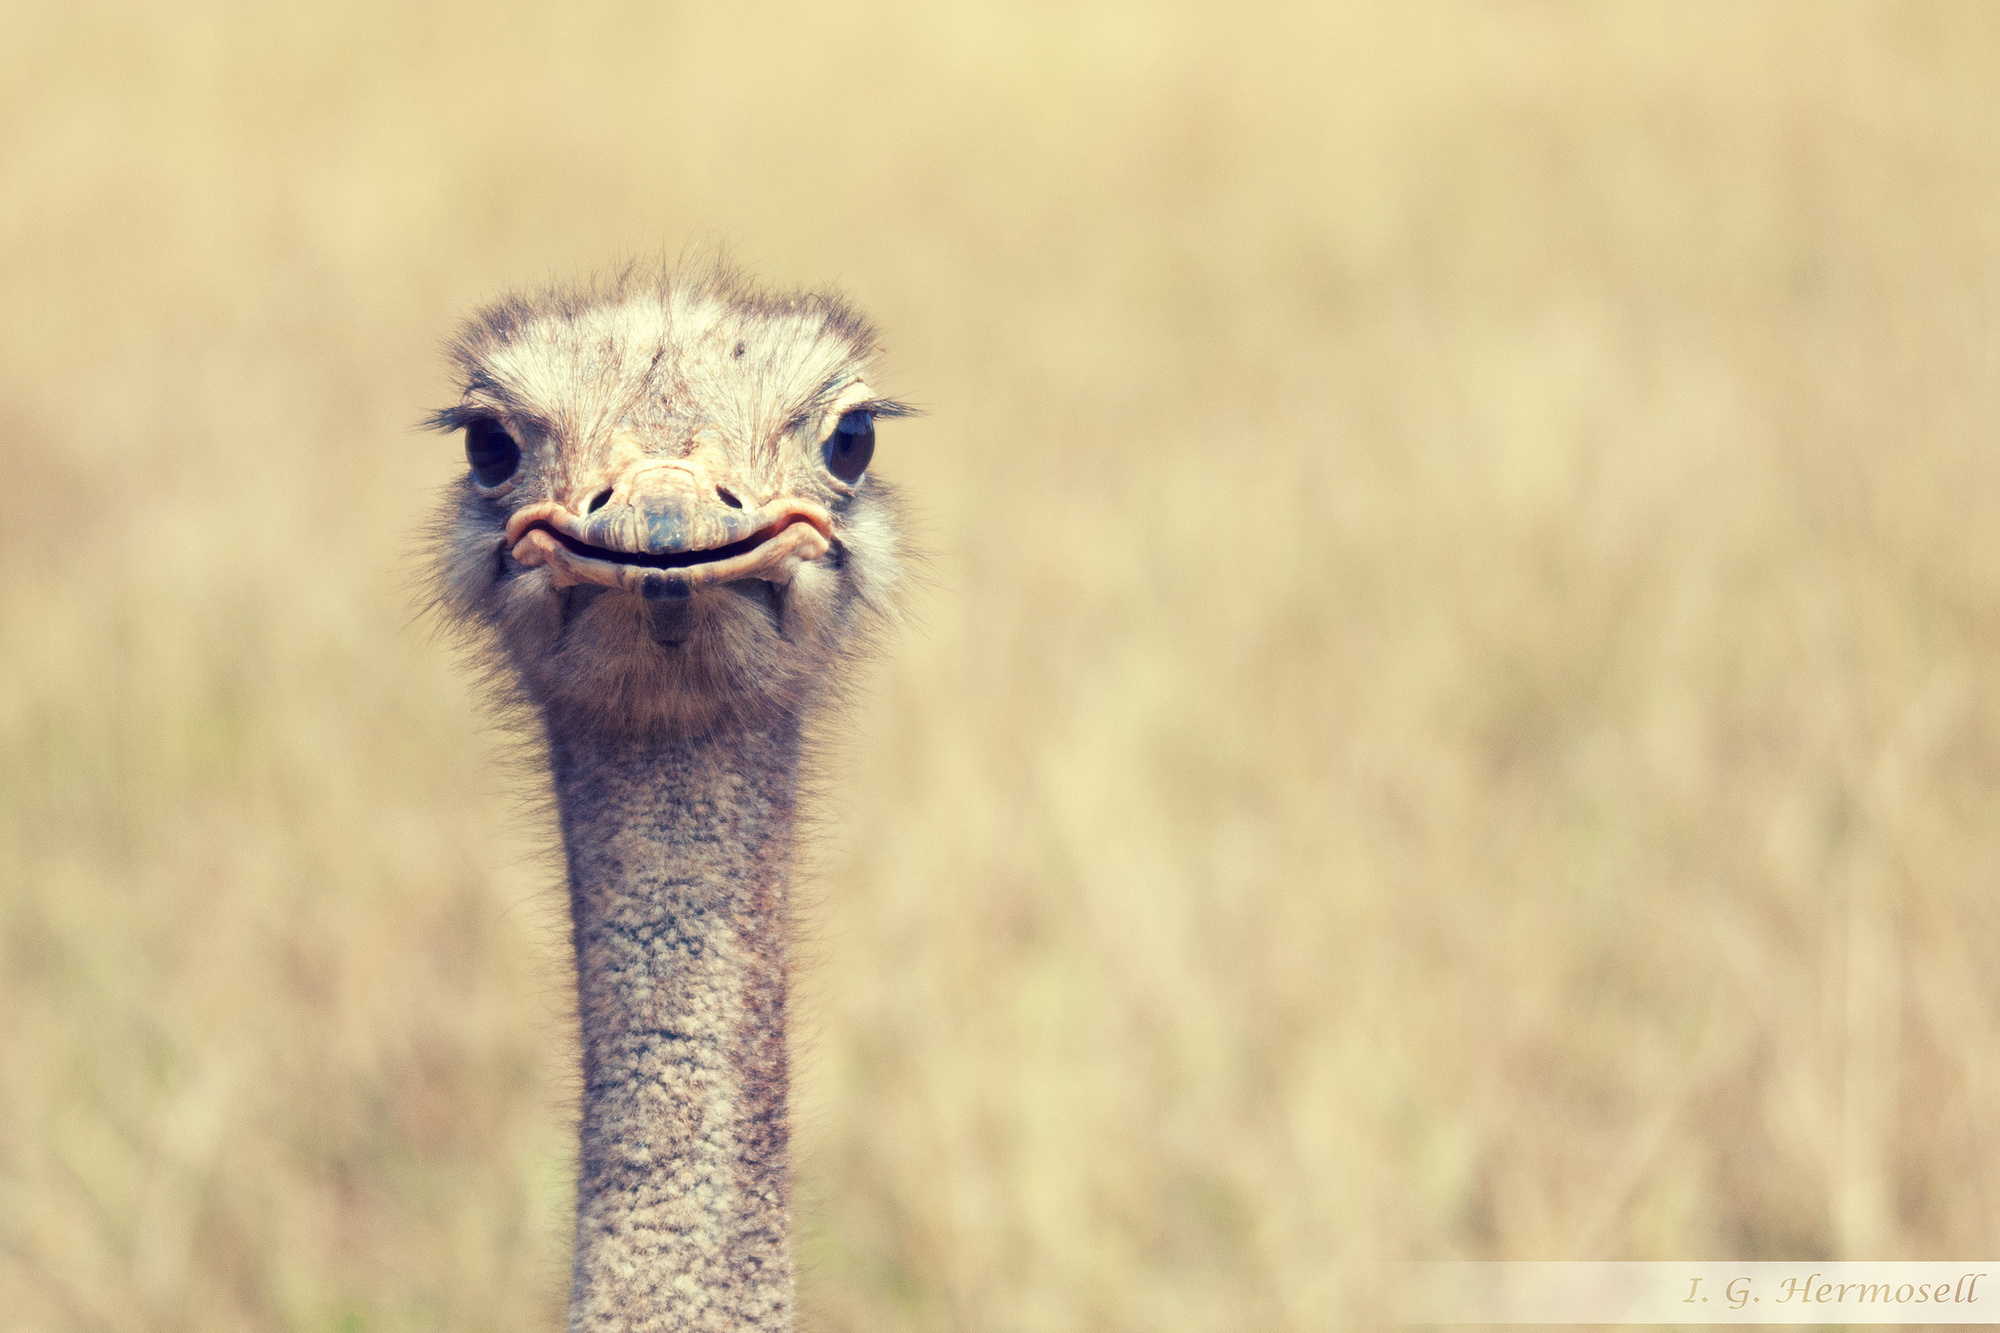 Did you know that ostriches have eyes that measure about 2 inches across? They have the largest eyes of any land animal, according to National Geographic. Their eyes are even larger than their brains!